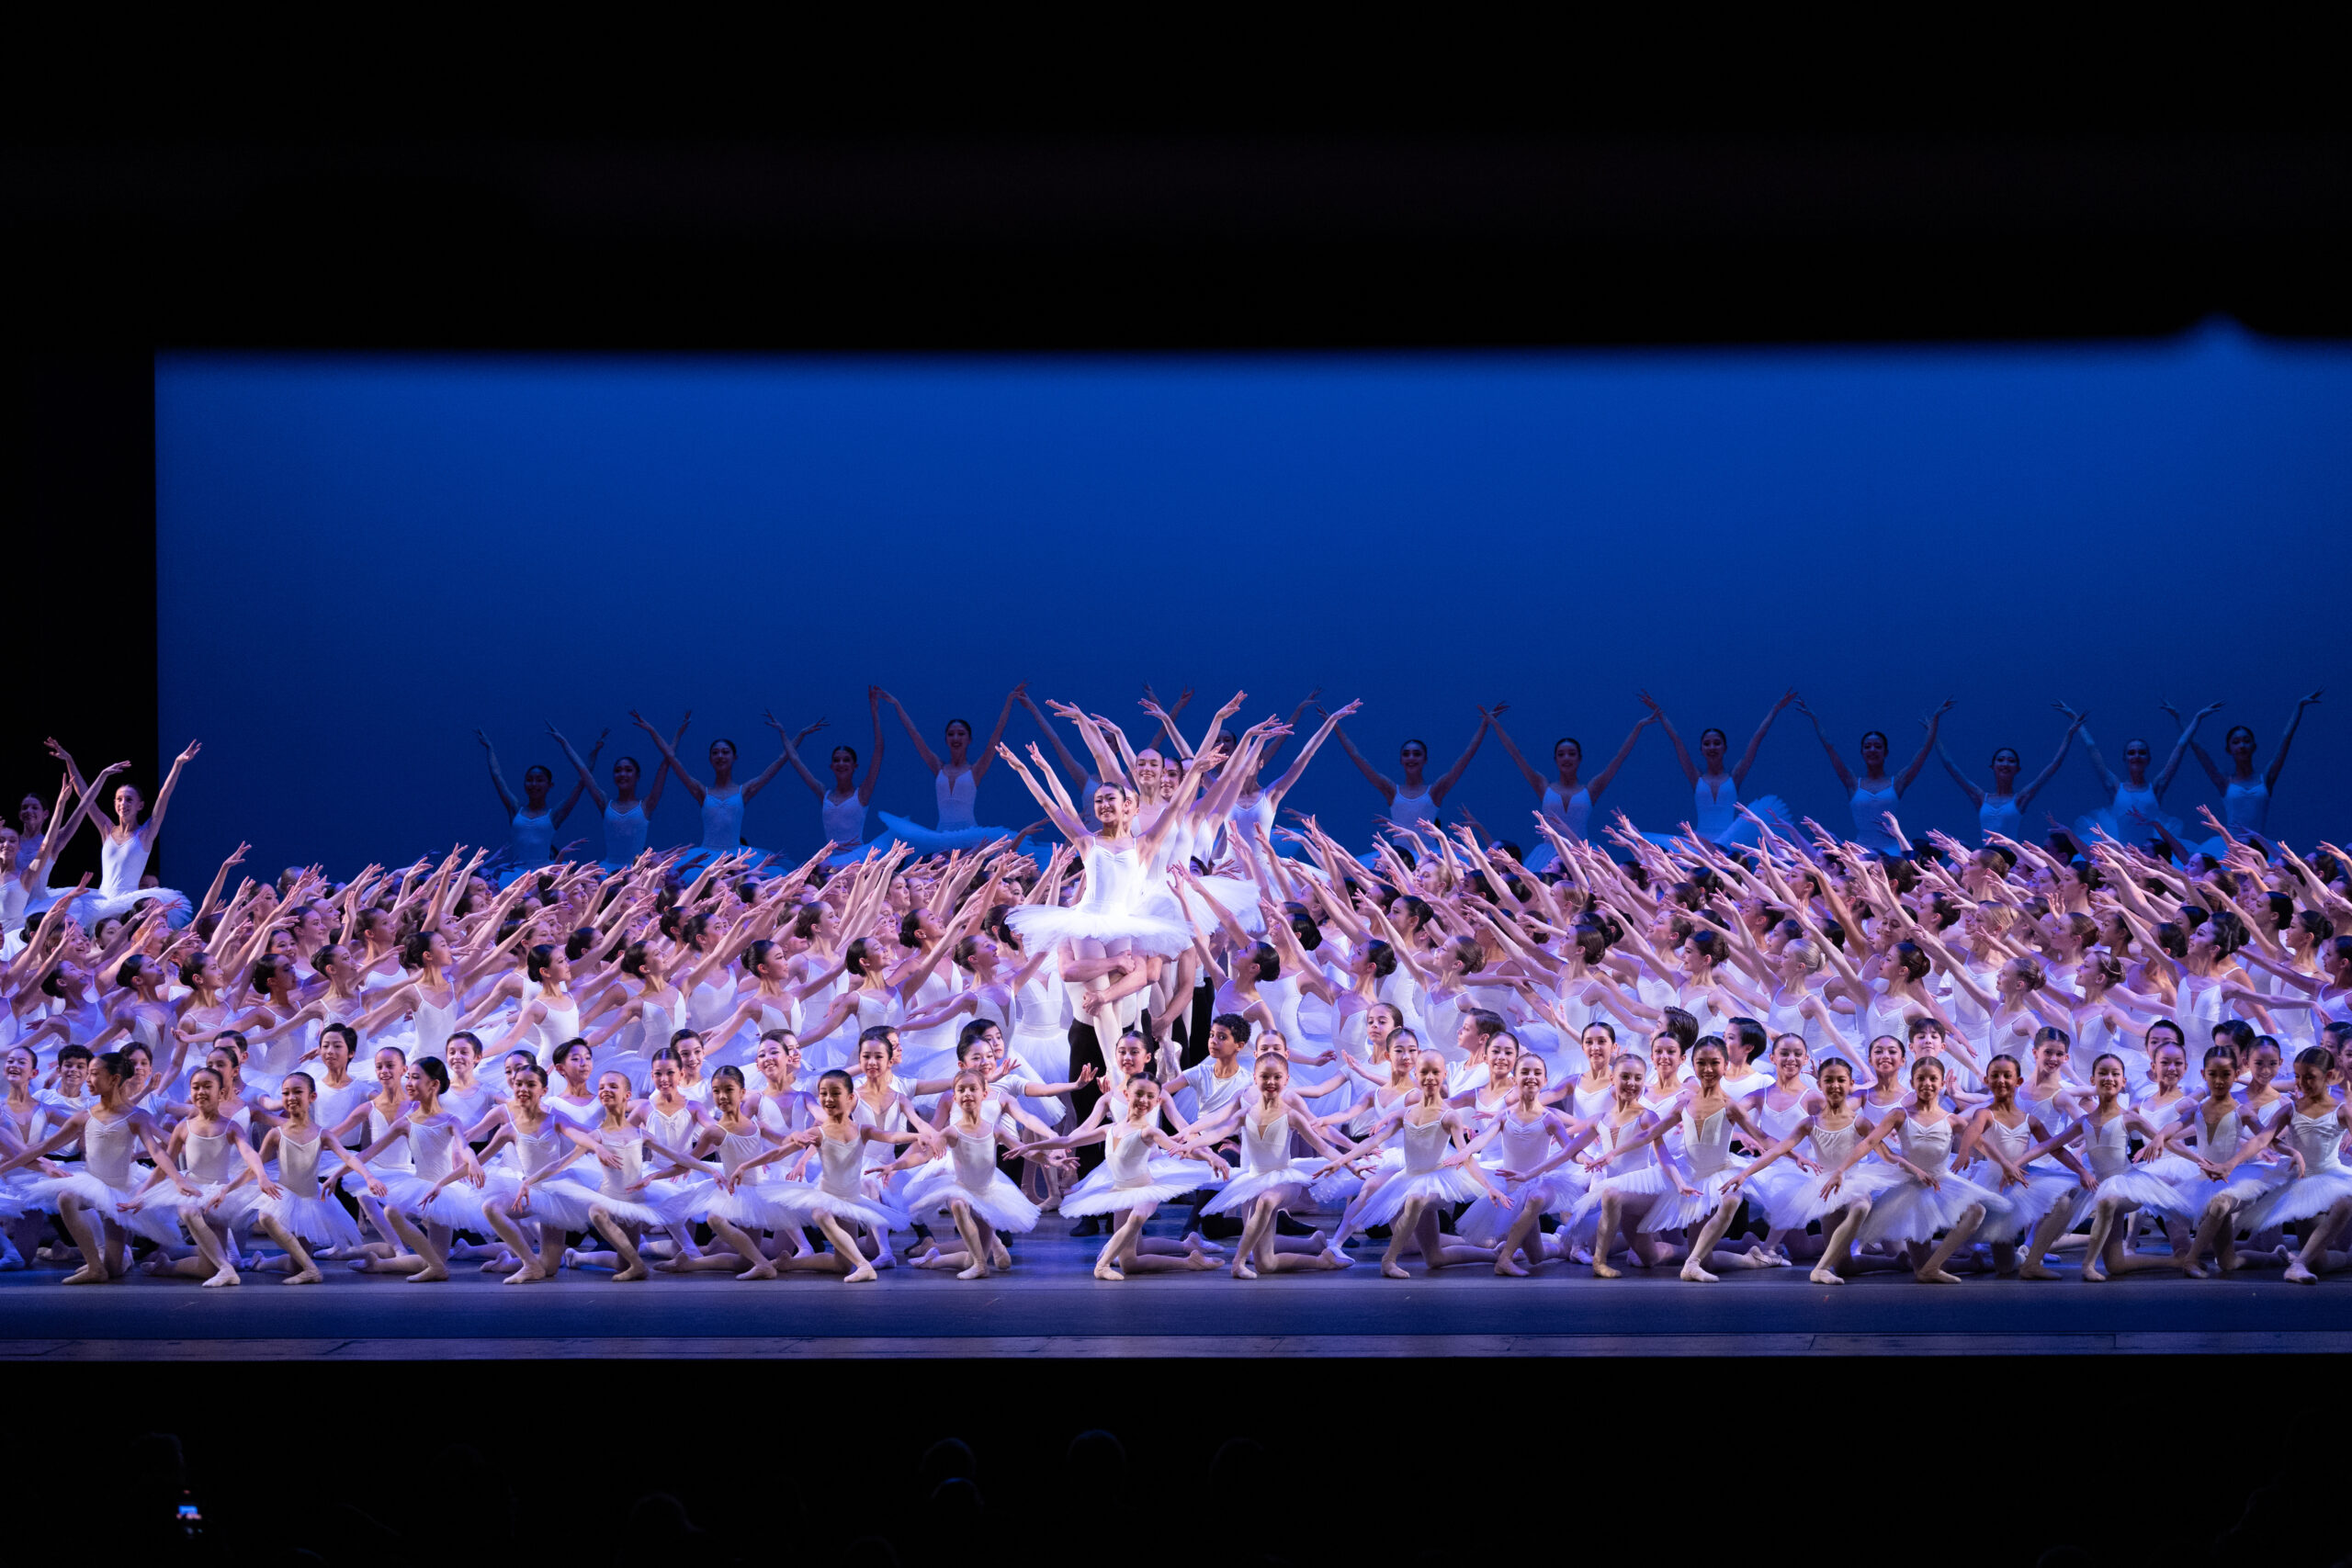 A very large group of student ballet dancers make a tableau, filling the entire stage. The girls wear white leotards, white tutus, pink tights and pink abllet shoes. The boys wear white t-shirts, black tights, white socks and white ballet shoes. The dancers pose in multiple levels, with several lines in the front on their knees, those in the middle in tendu facing the center, and a group of boys in the back and in a line down the center lifting their femal partner into a simple lift.